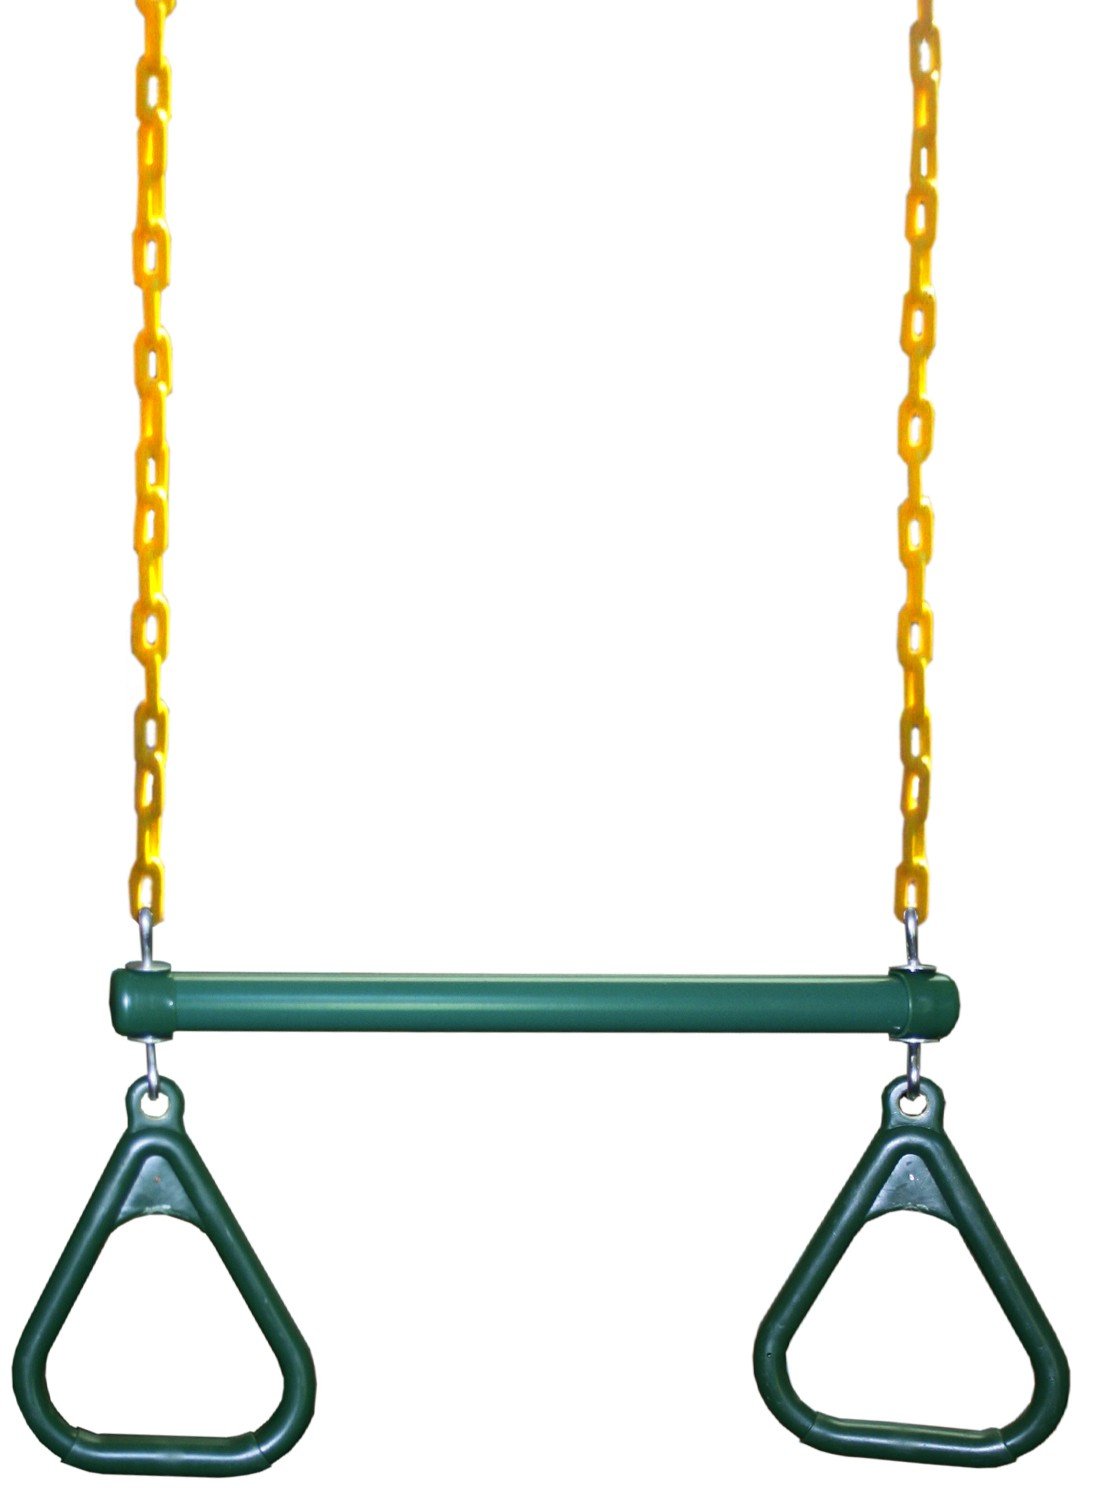 Eastern Jungle Gym Trapeze Bar and Gym Rings | Large Trapeze Bar- 20” with Coated 43” Chains | Playground Trapeze Bar and Rings